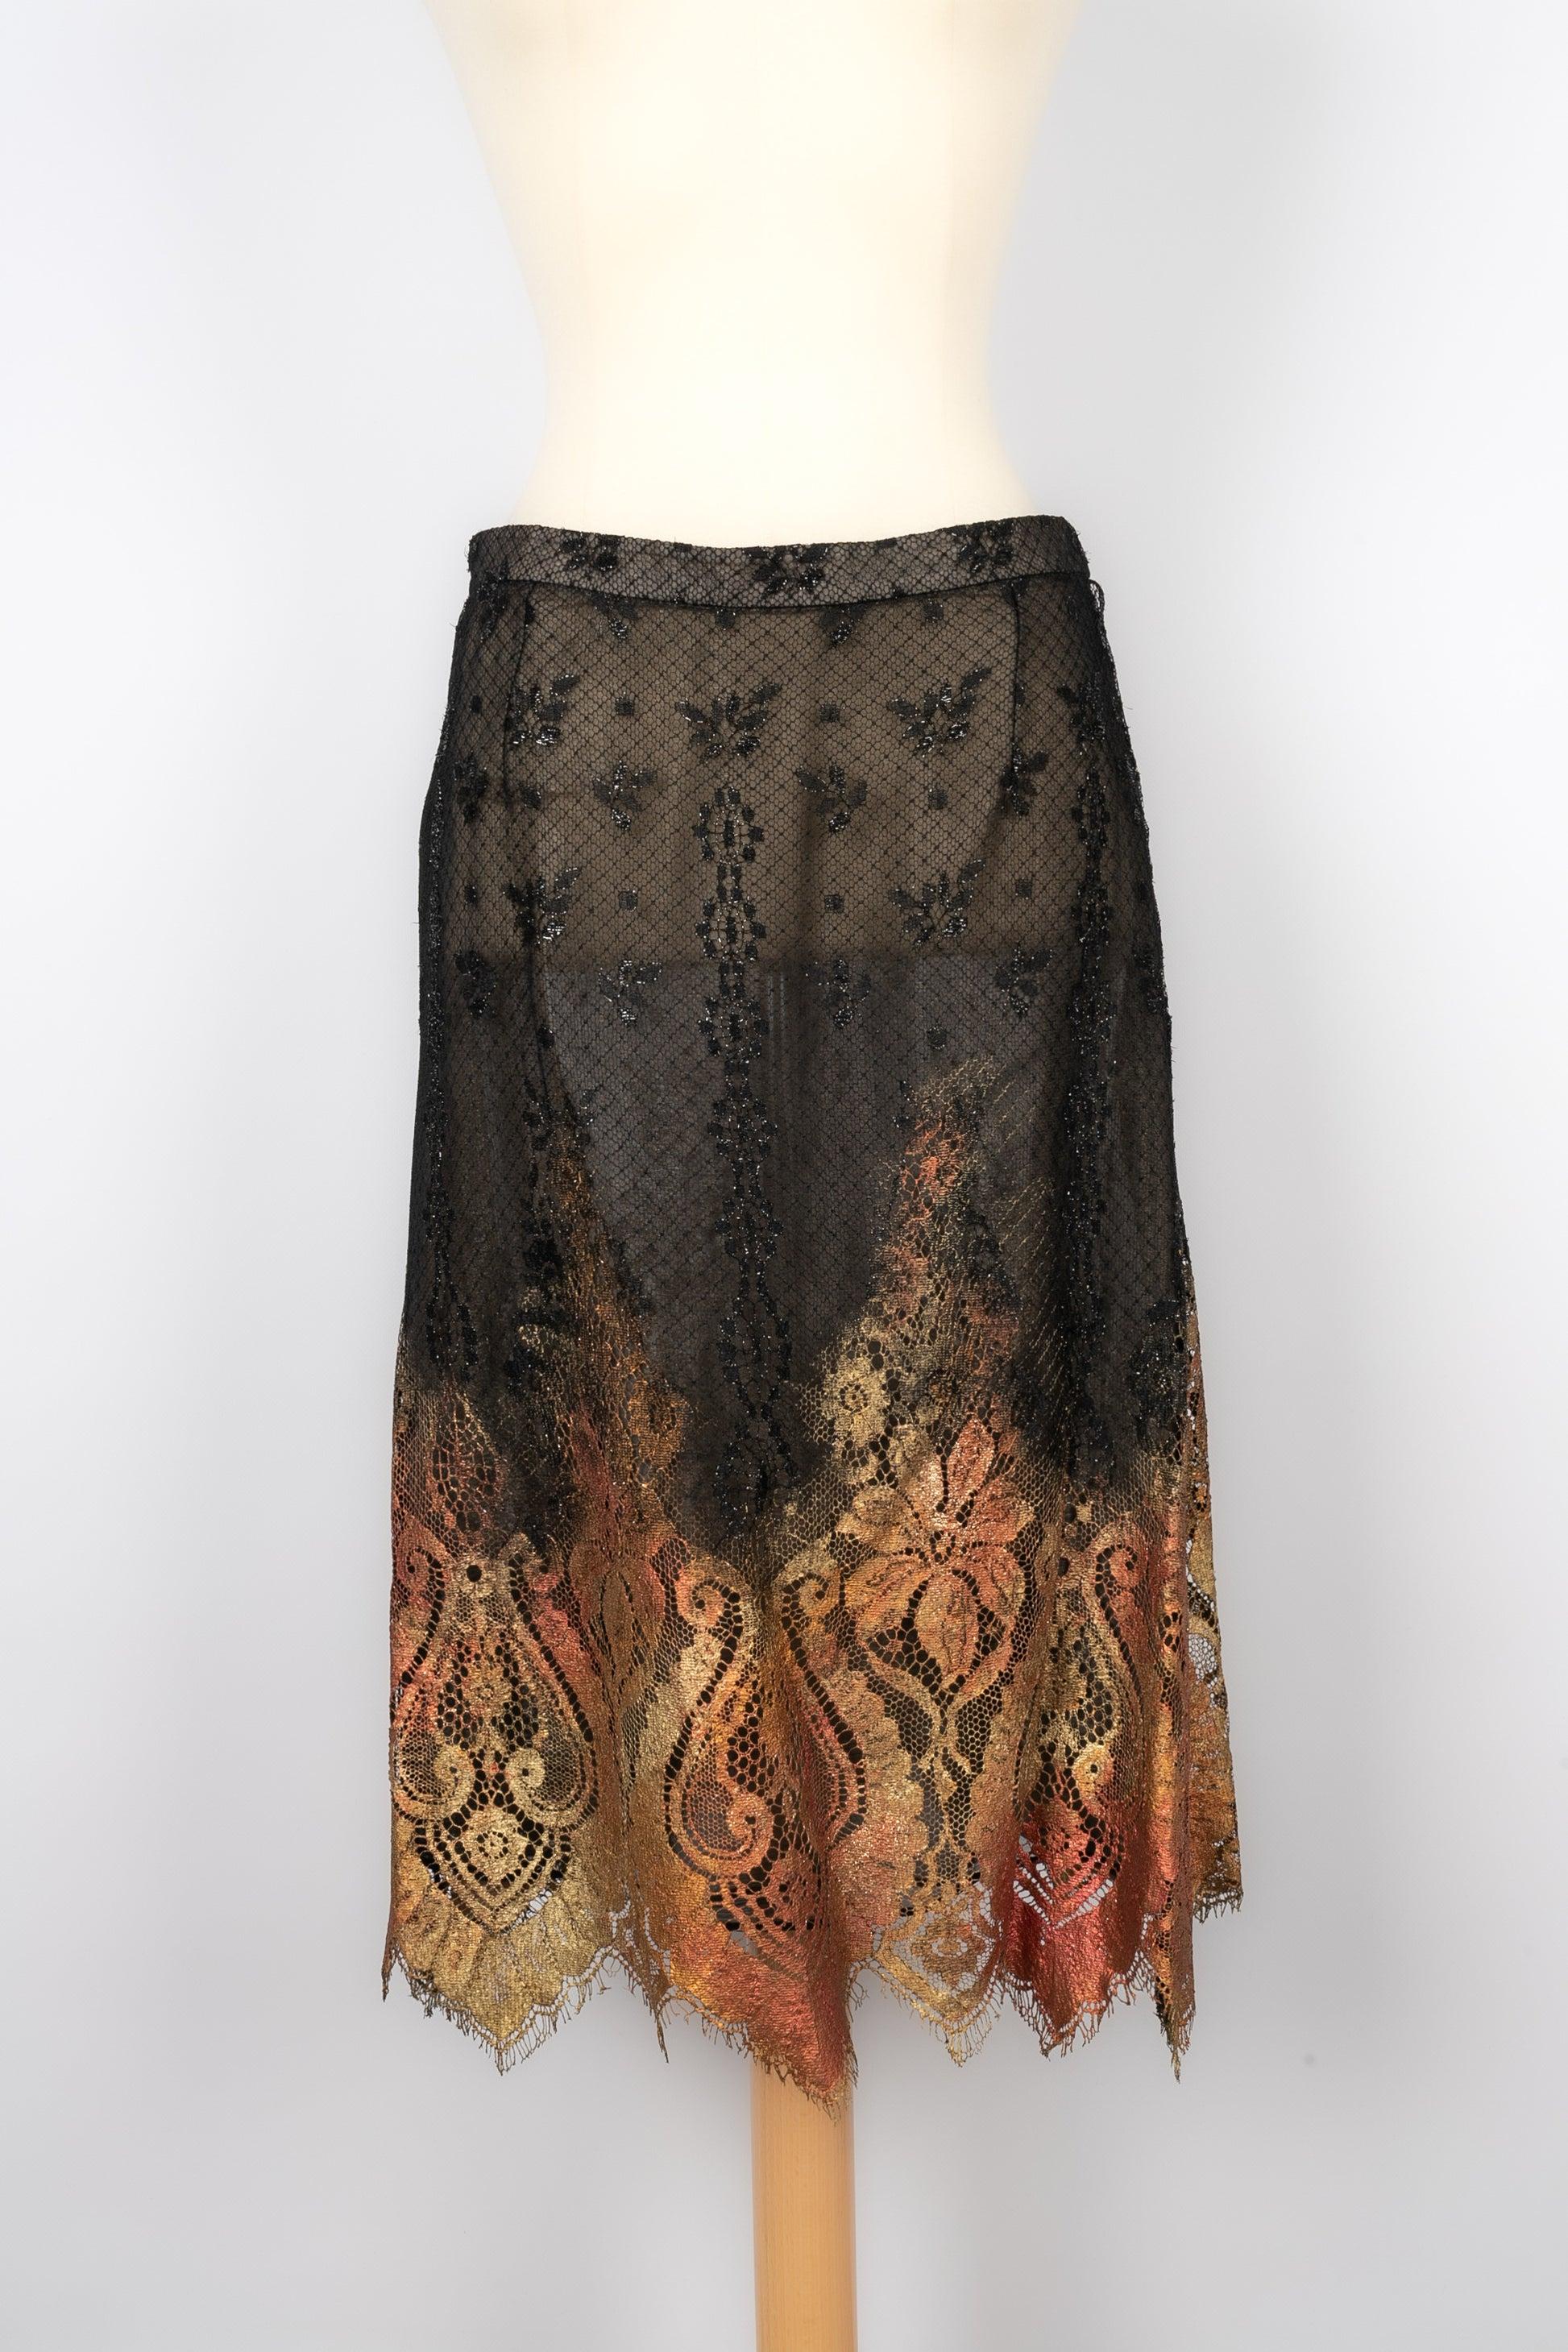 Christian Lacroix Skirt and a Jacket Decorated with Tie-and-Dye Lace Set For Sale 5